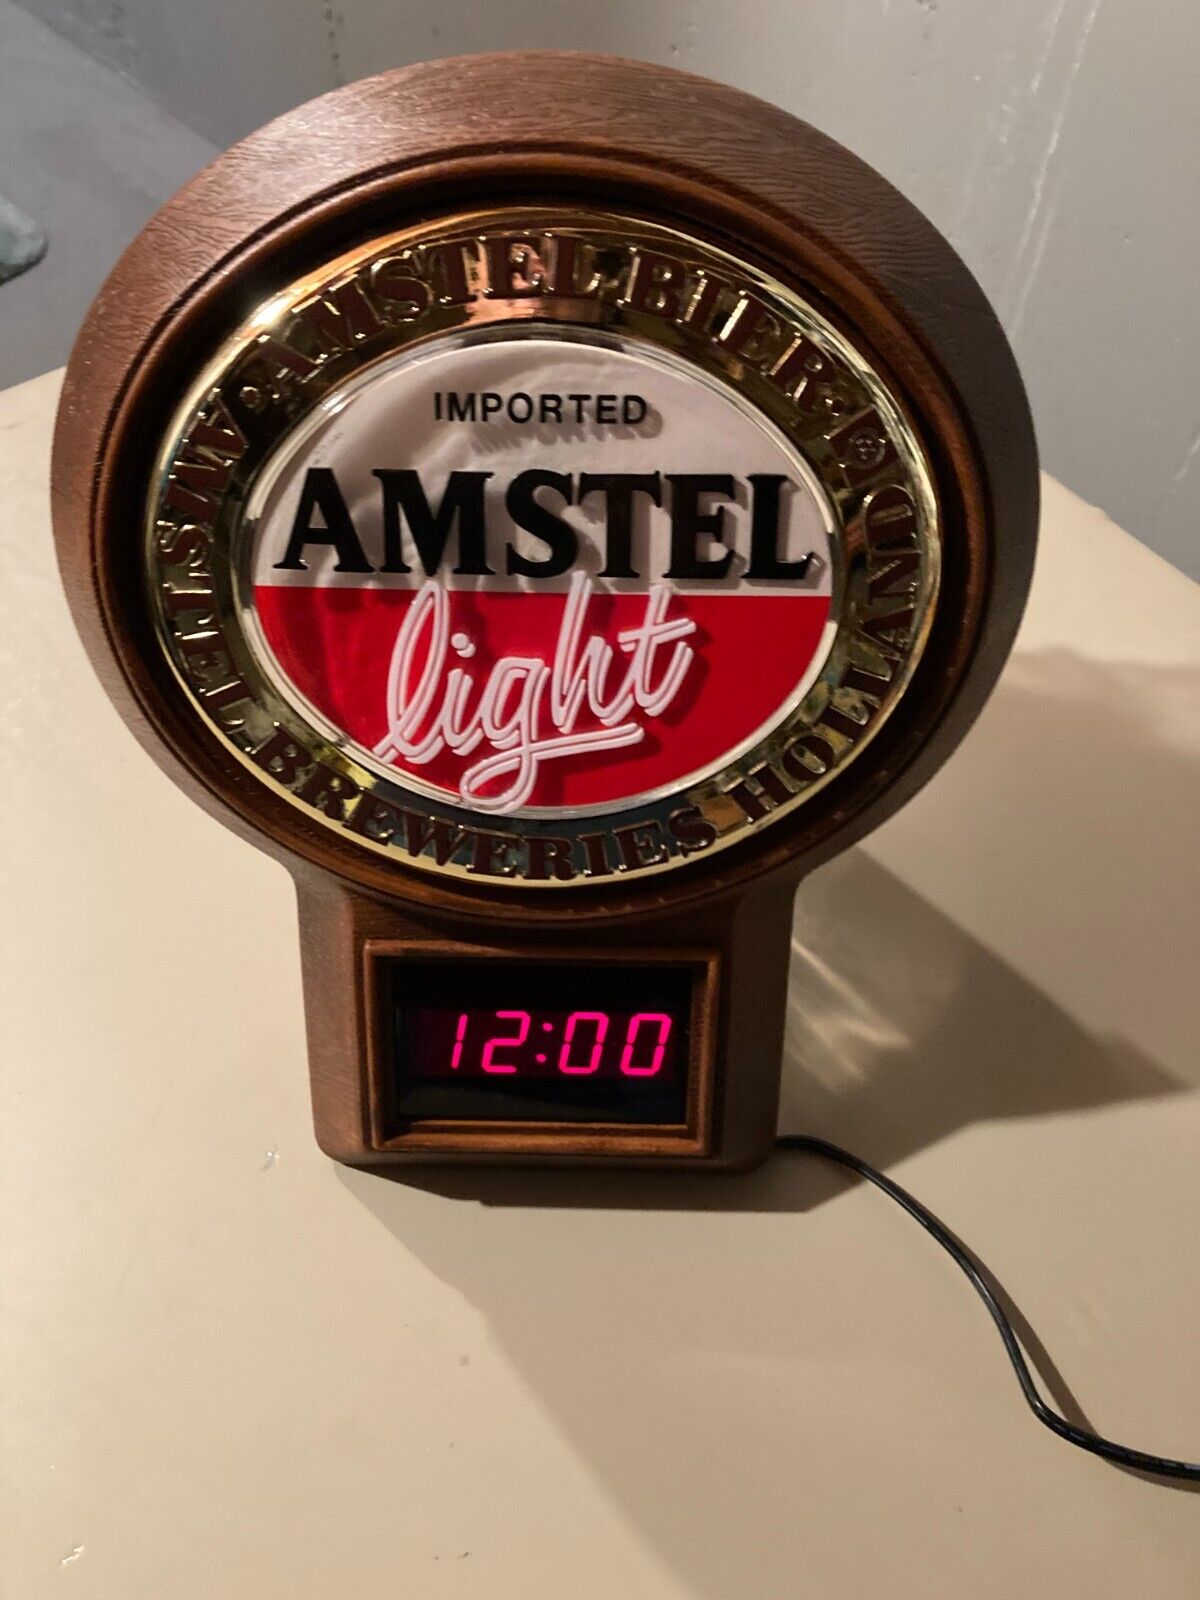 Amstel Light electric clock.  Excellent condition, new in early 1990's Без бренда - фотография #2